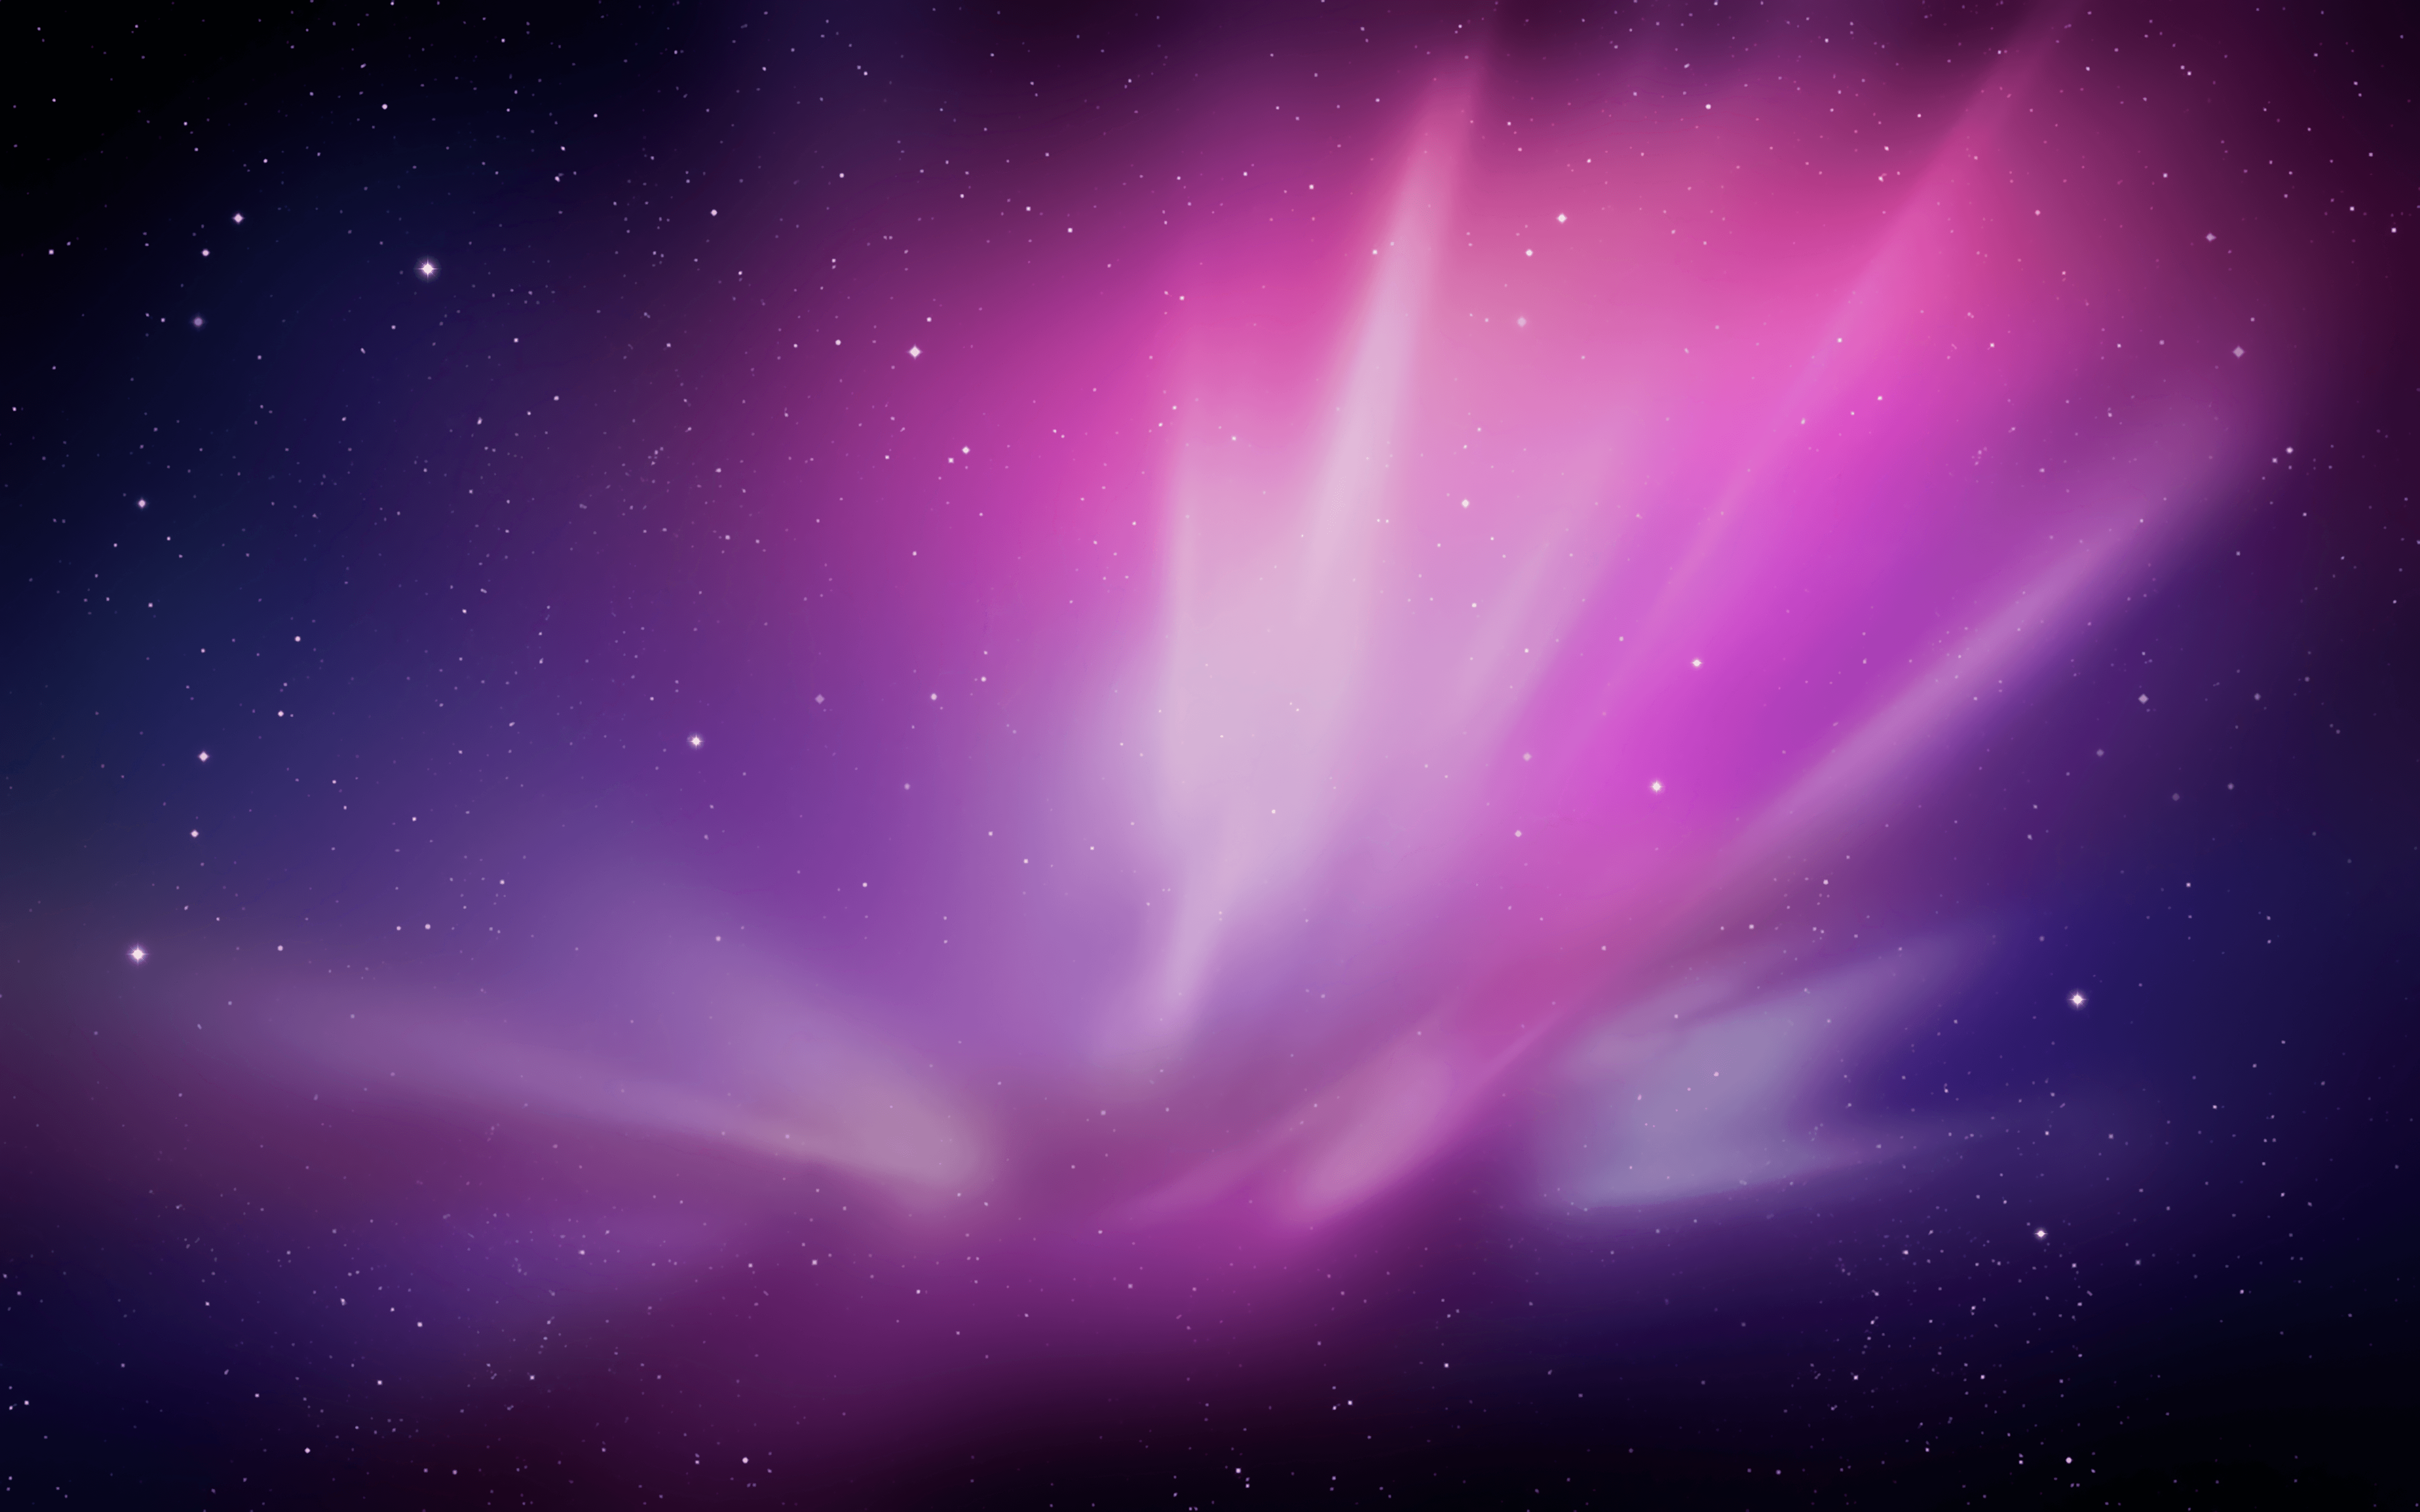 Old Mac Os X Wallpapers 4k Hd Old Mac Os X Backgrounds On Wallpaperbat